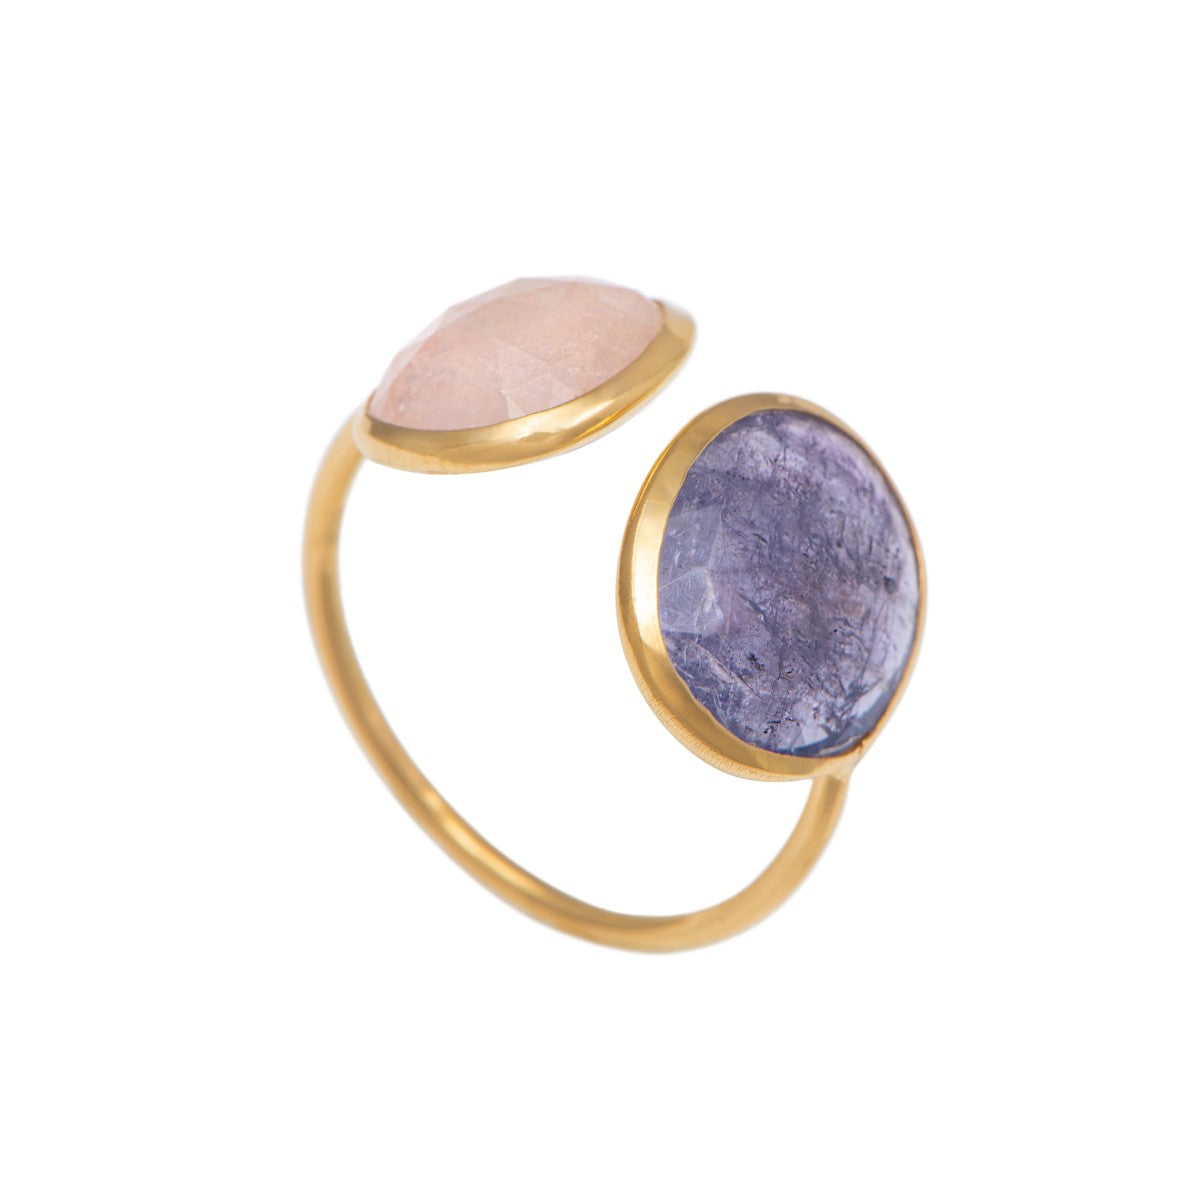 Gold Plated Sterling Silver Two Gemstone Ring with Morganite and Tanzanite